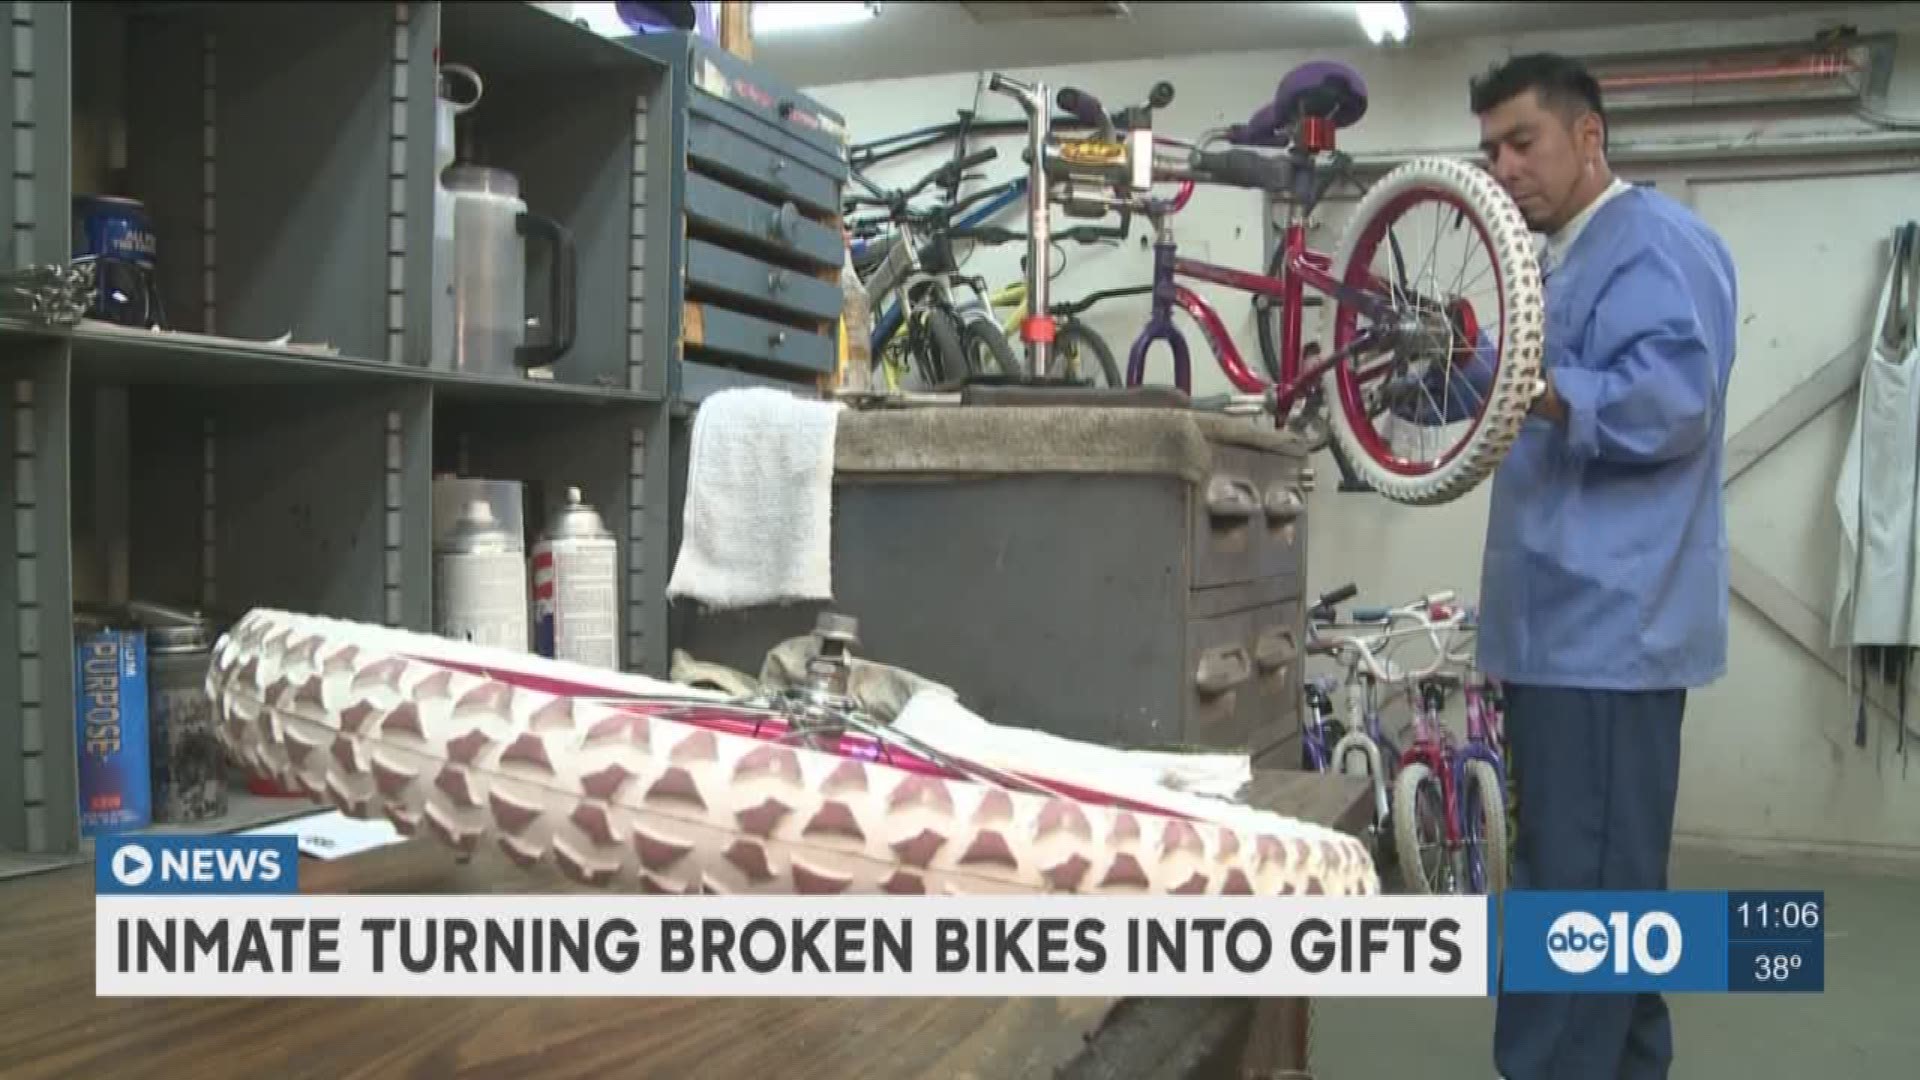 An inmate at Folsom State Prison is turning broken down bikes into wanted gifts. (Dec. 20, 2016) 